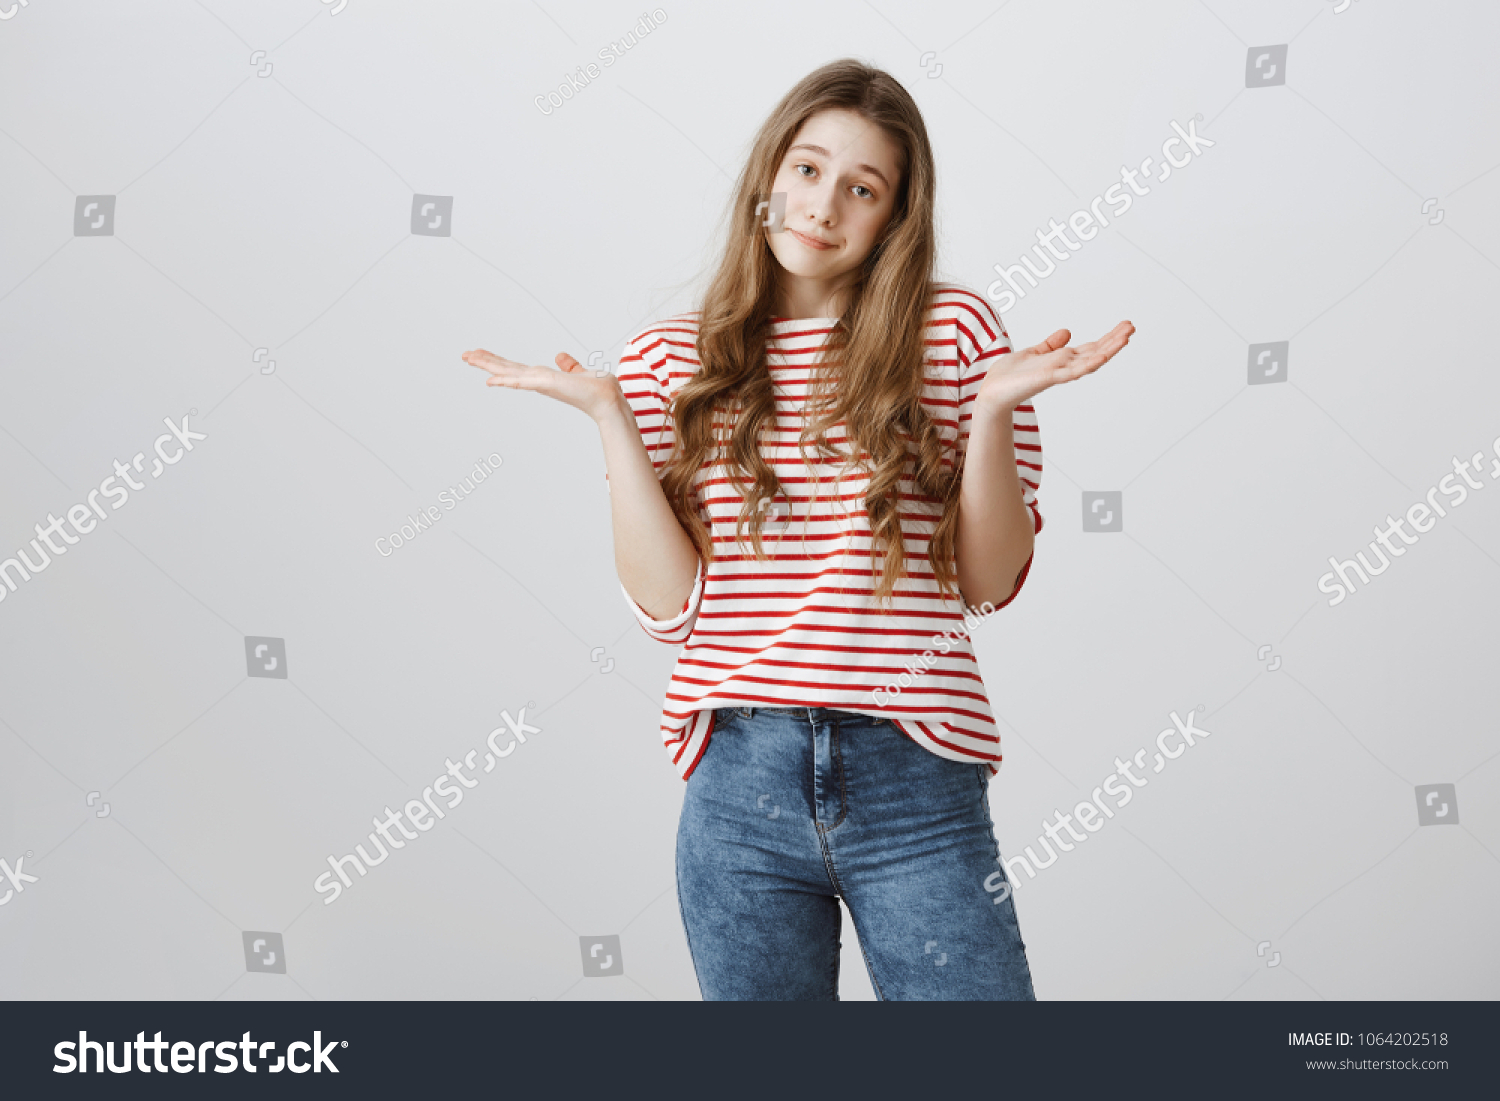 I do not care about rules. Portrait of indifferent careless teenage girl with blonde hair shrugging and holding spread palms near shoulders, being uninterested and bothered with stupid questions #1064202518